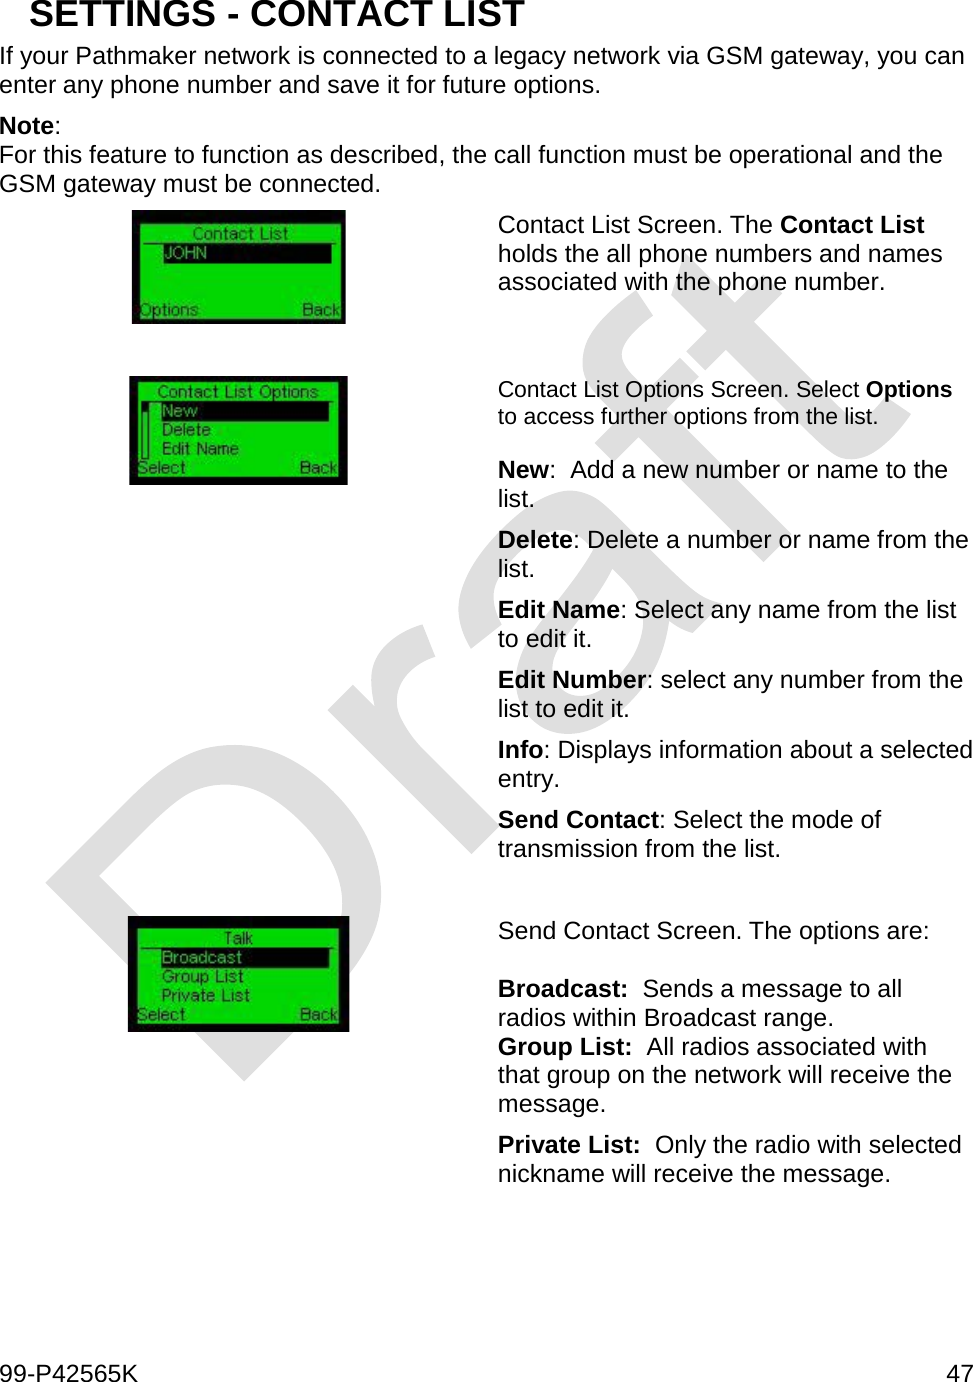  99-P42565K     47  SETTINGS - CONTACT LIST If your Pathmaker network is connected to a legacy network via GSM gateway, you can enter any phone number and save it for future options.  Note: For this feature to function as described, the call function must be operational and the GSM gateway must be connected.  Contact List Screen. The Contact List holds the all phone numbers and names associated with the phone number.    Contact List Options Screen. Select Options to access further options from the list.  New:  Add a new number or name to the list. Delete: Delete a number or name from the list. Edit Name: Select any name from the list to edit it. Edit Number: select any number from the list to edit it. Info: Displays information about a selected entry. Send Contact: Select the mode of transmission from the list.   Send Contact Screen. The options are:  Broadcast:  Sends a message to all radios within Broadcast range. Group List:  All radios associated with that group on the network will receive the message. Private List:  Only the radio with selected nickname will receive the message.     